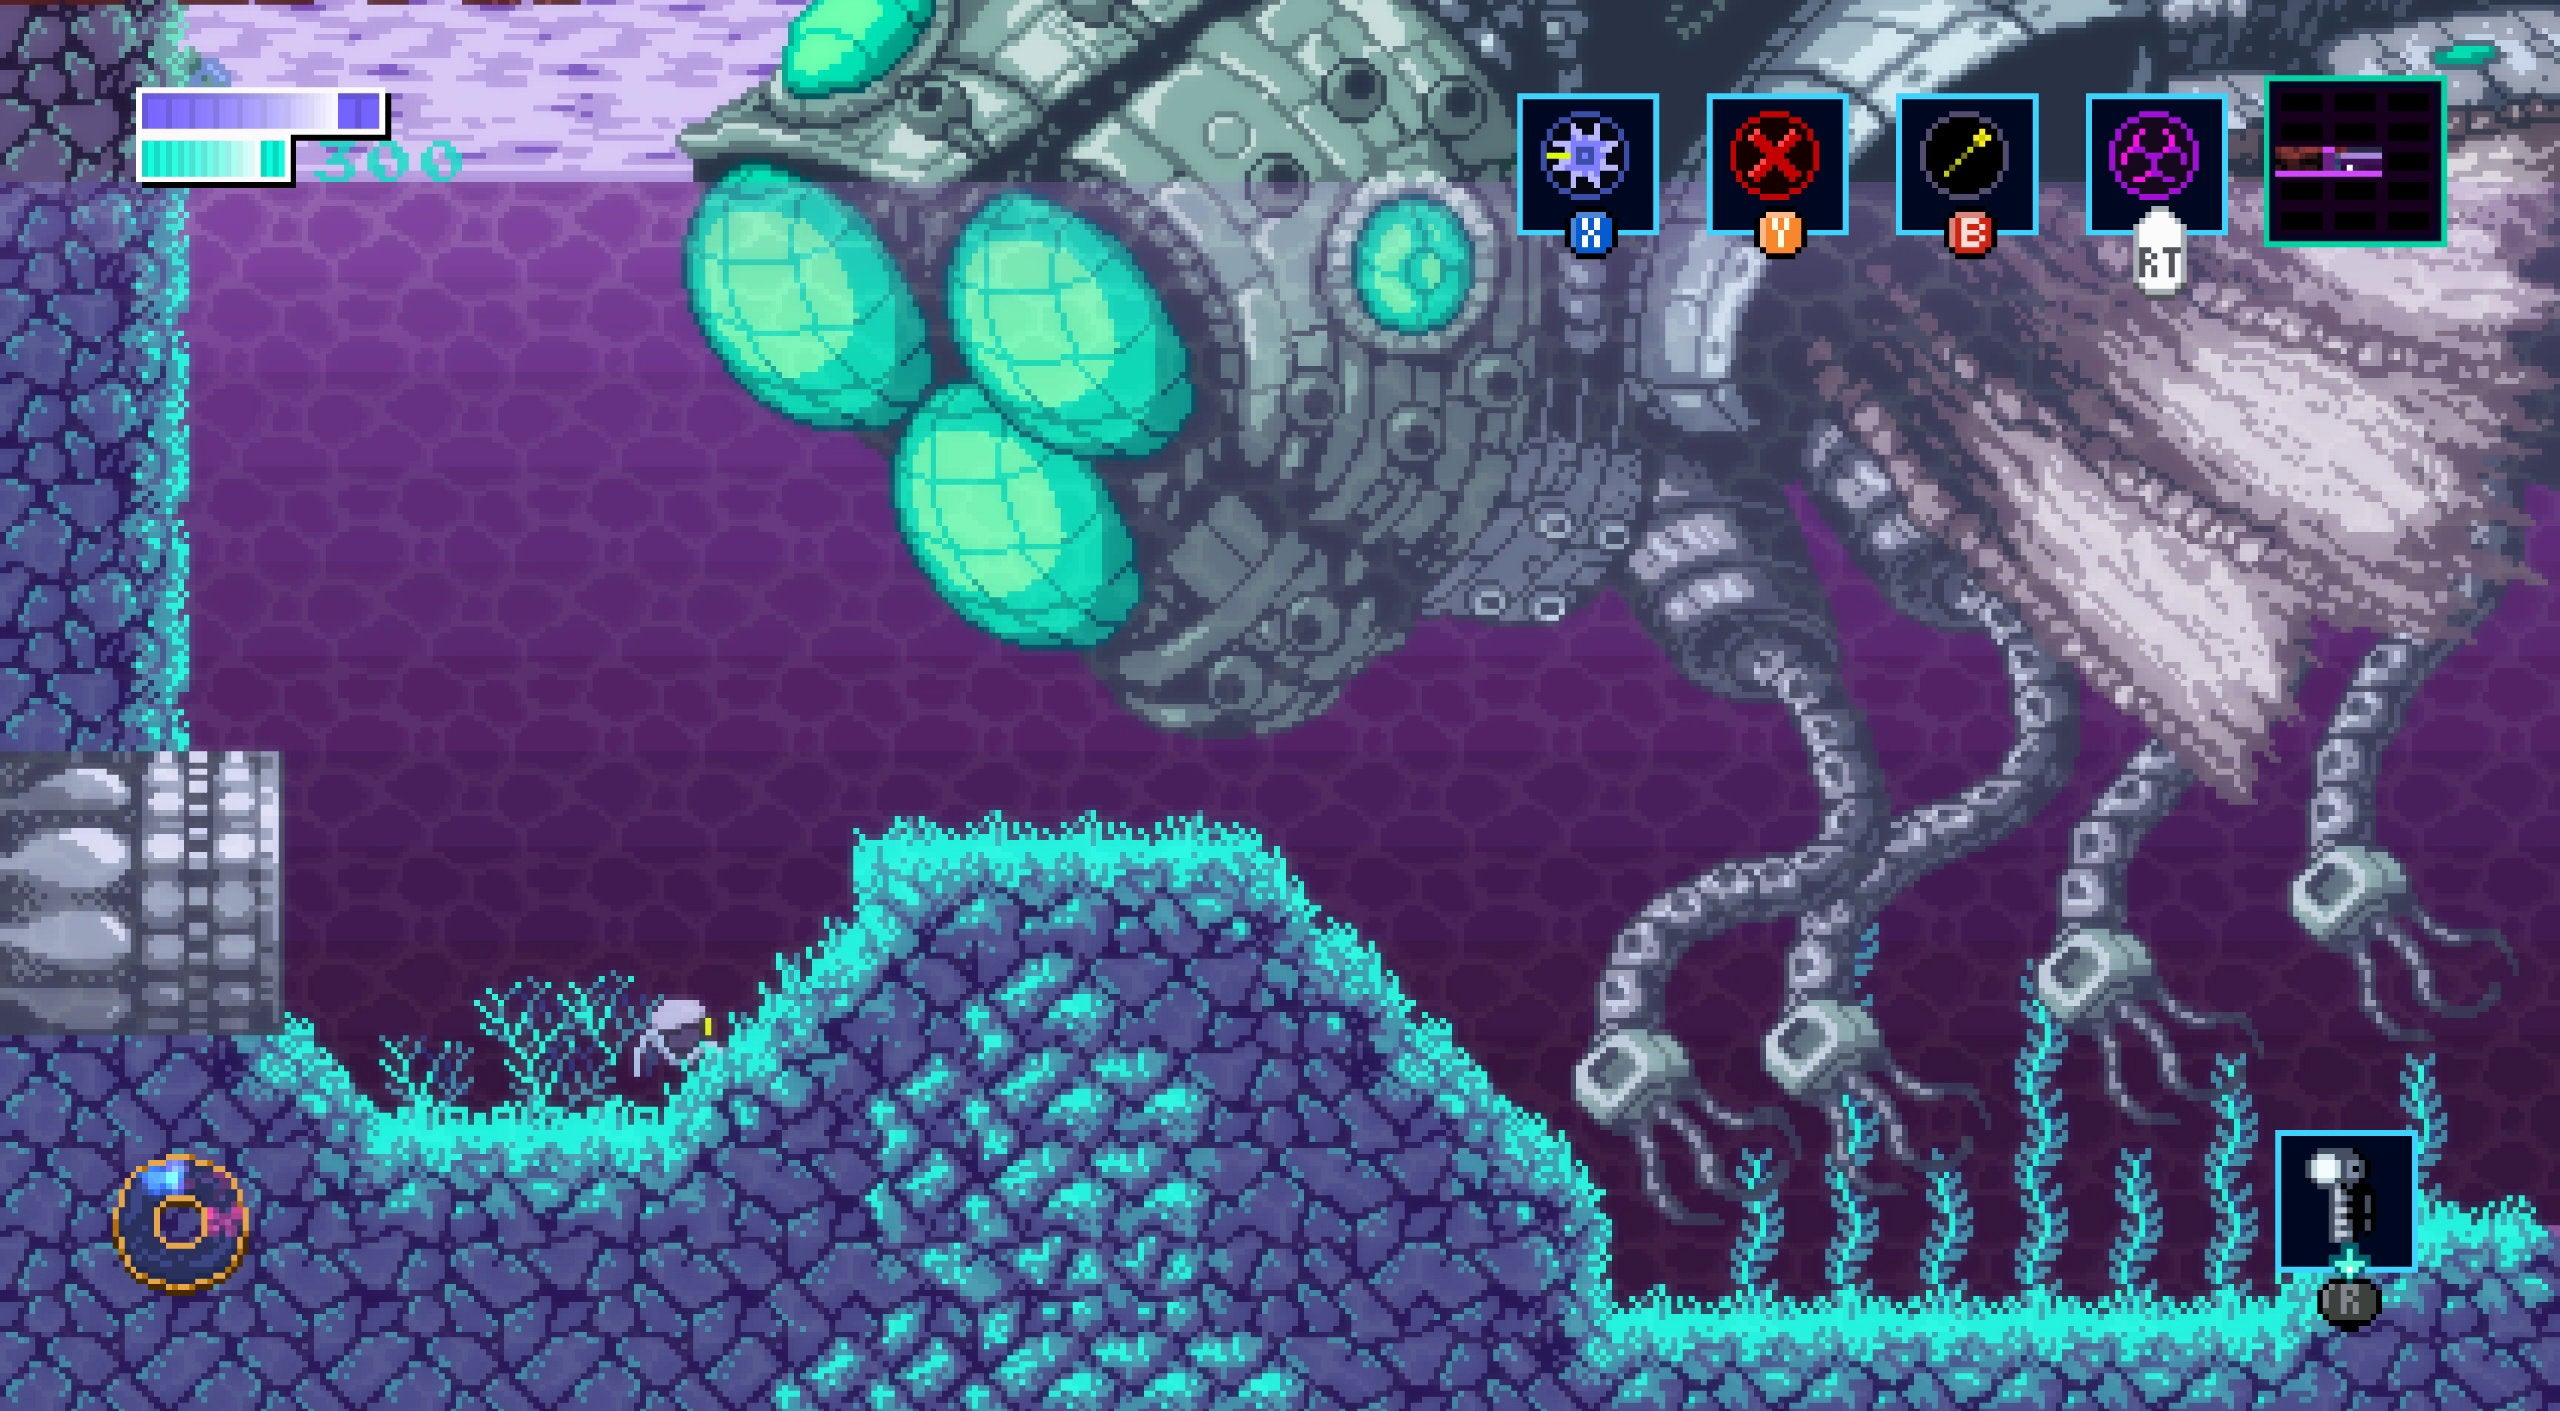 A small robot comes face to face with a giant fly robot in Axiom Verge 2